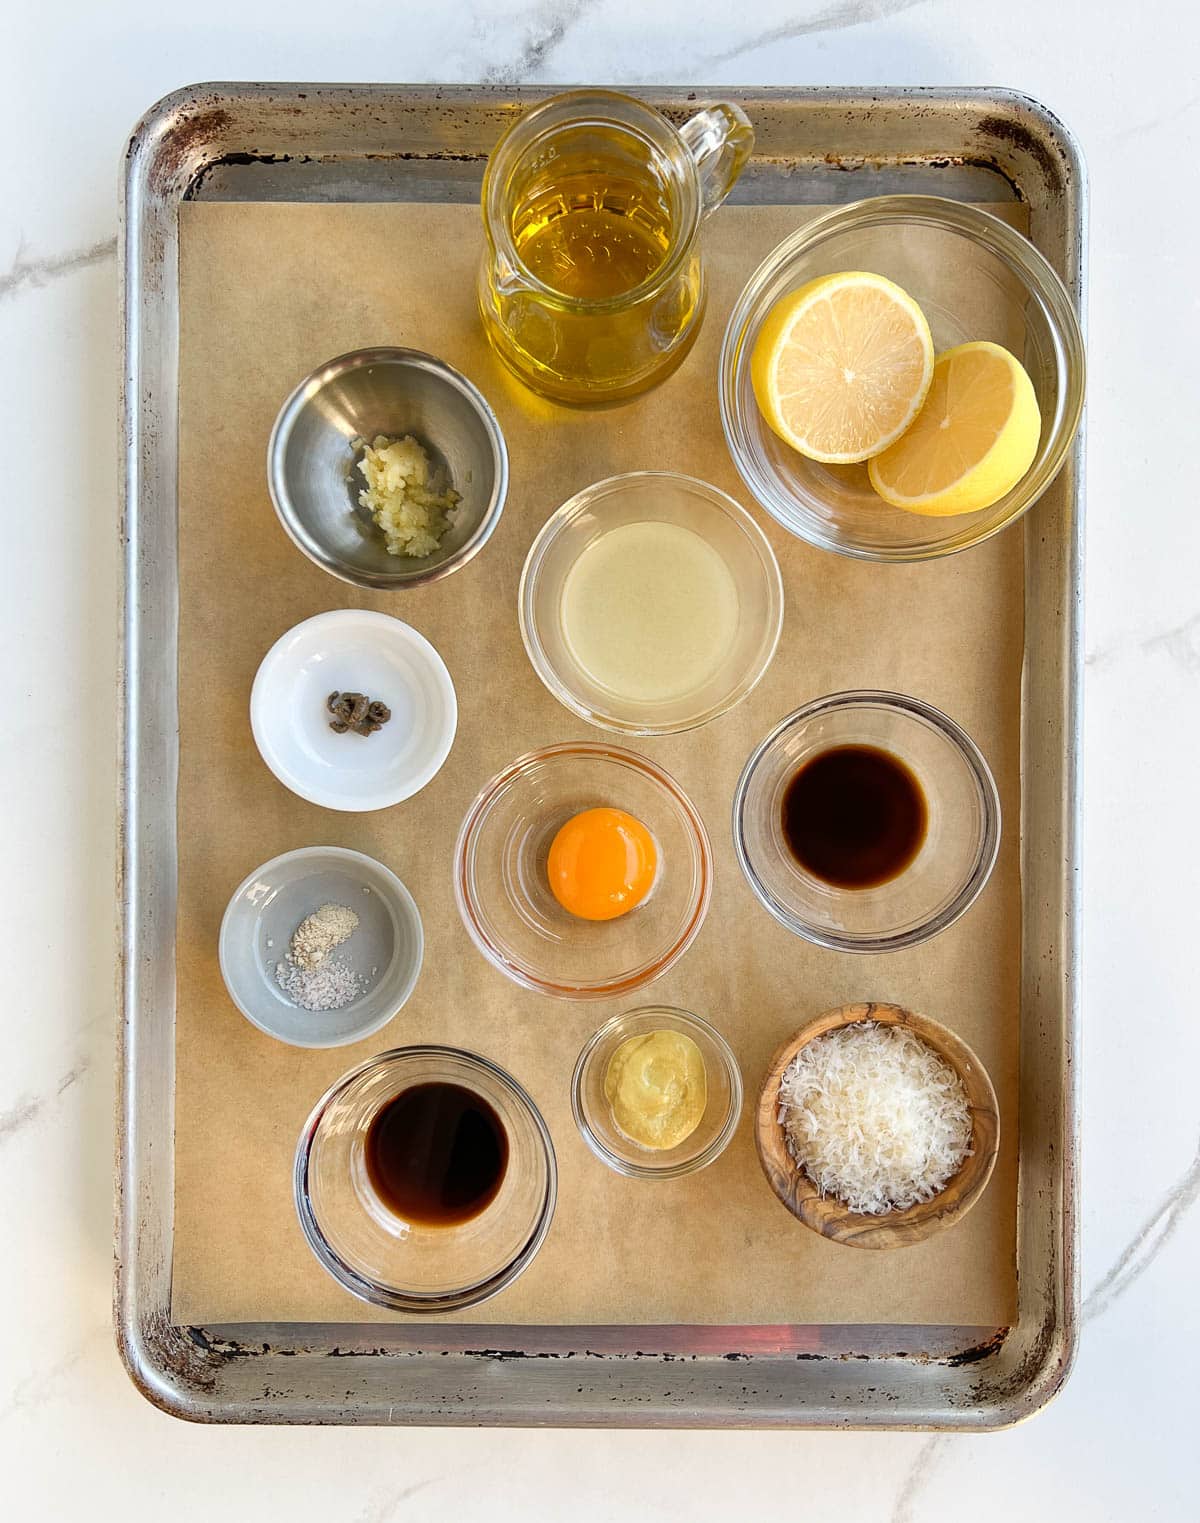 Dressing ingredients on a tray.